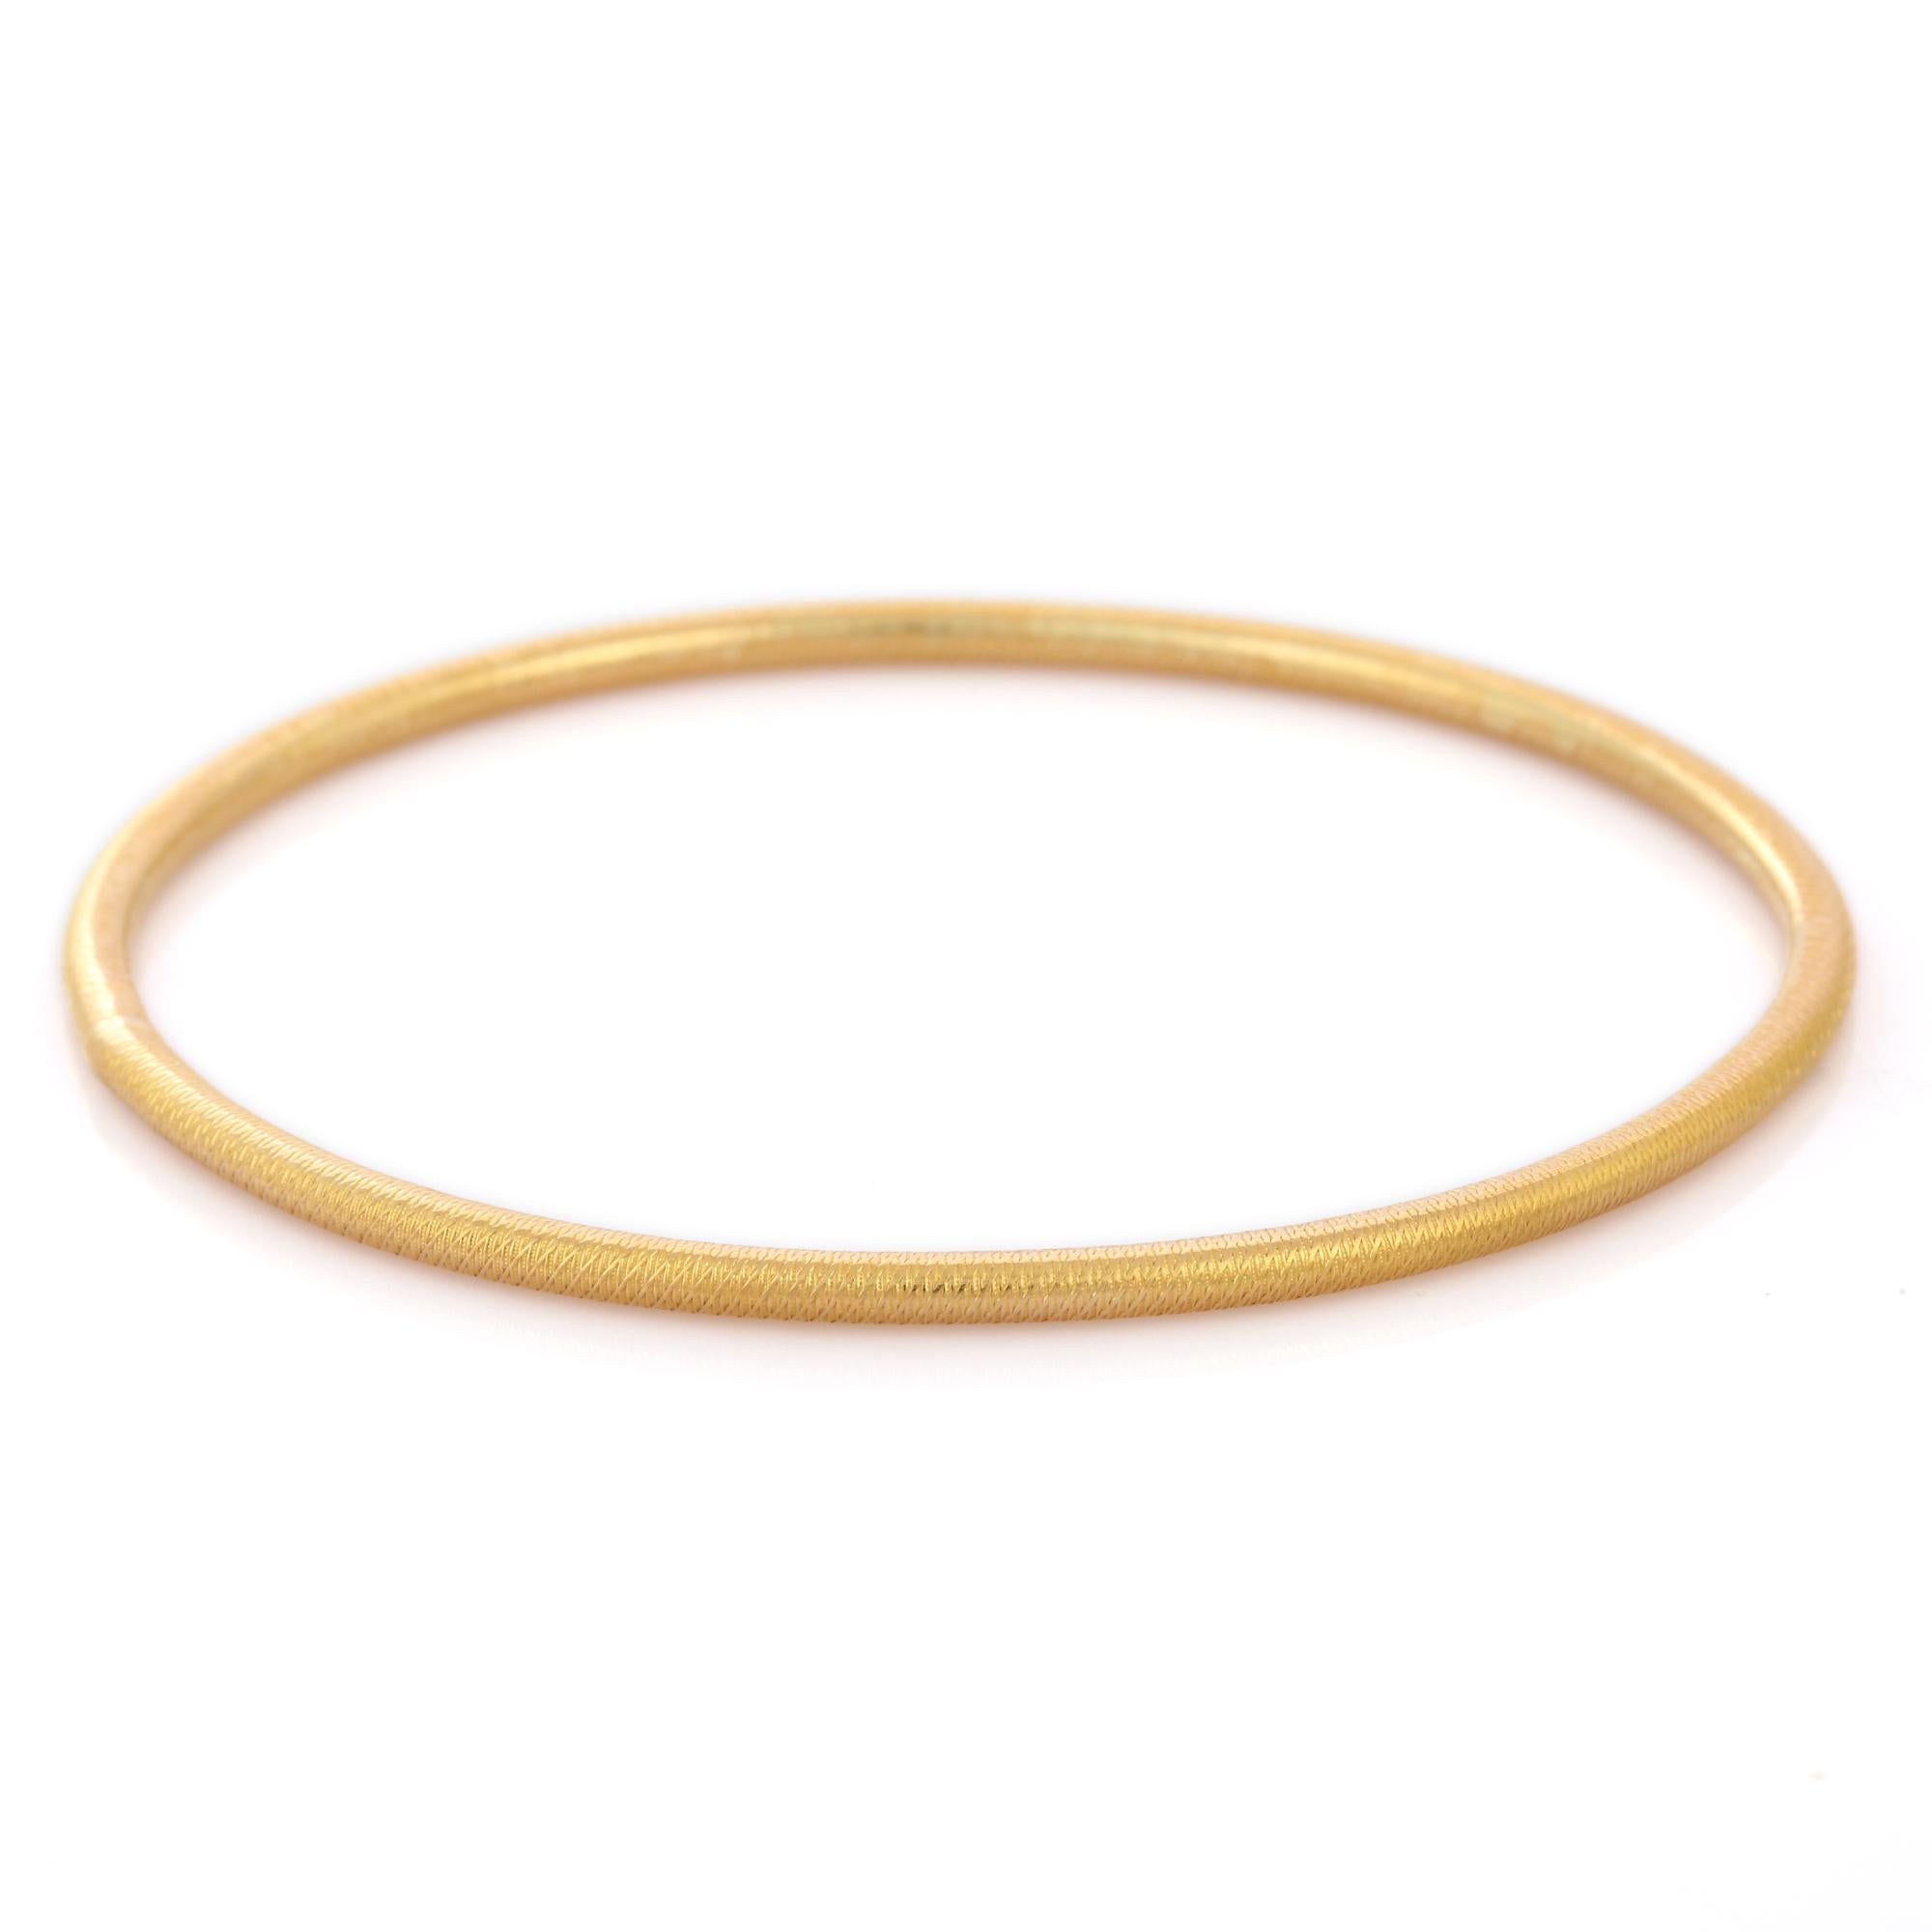 Solid Yellow Gold Unisex Bangle in 18K Gold. It’s a great jewelry ornament to wear on occasions and at the same time works as a wonderful gift for your loved ones. These lovely statement pieces are perfect generation jewelry to pass on.
Bangles feel